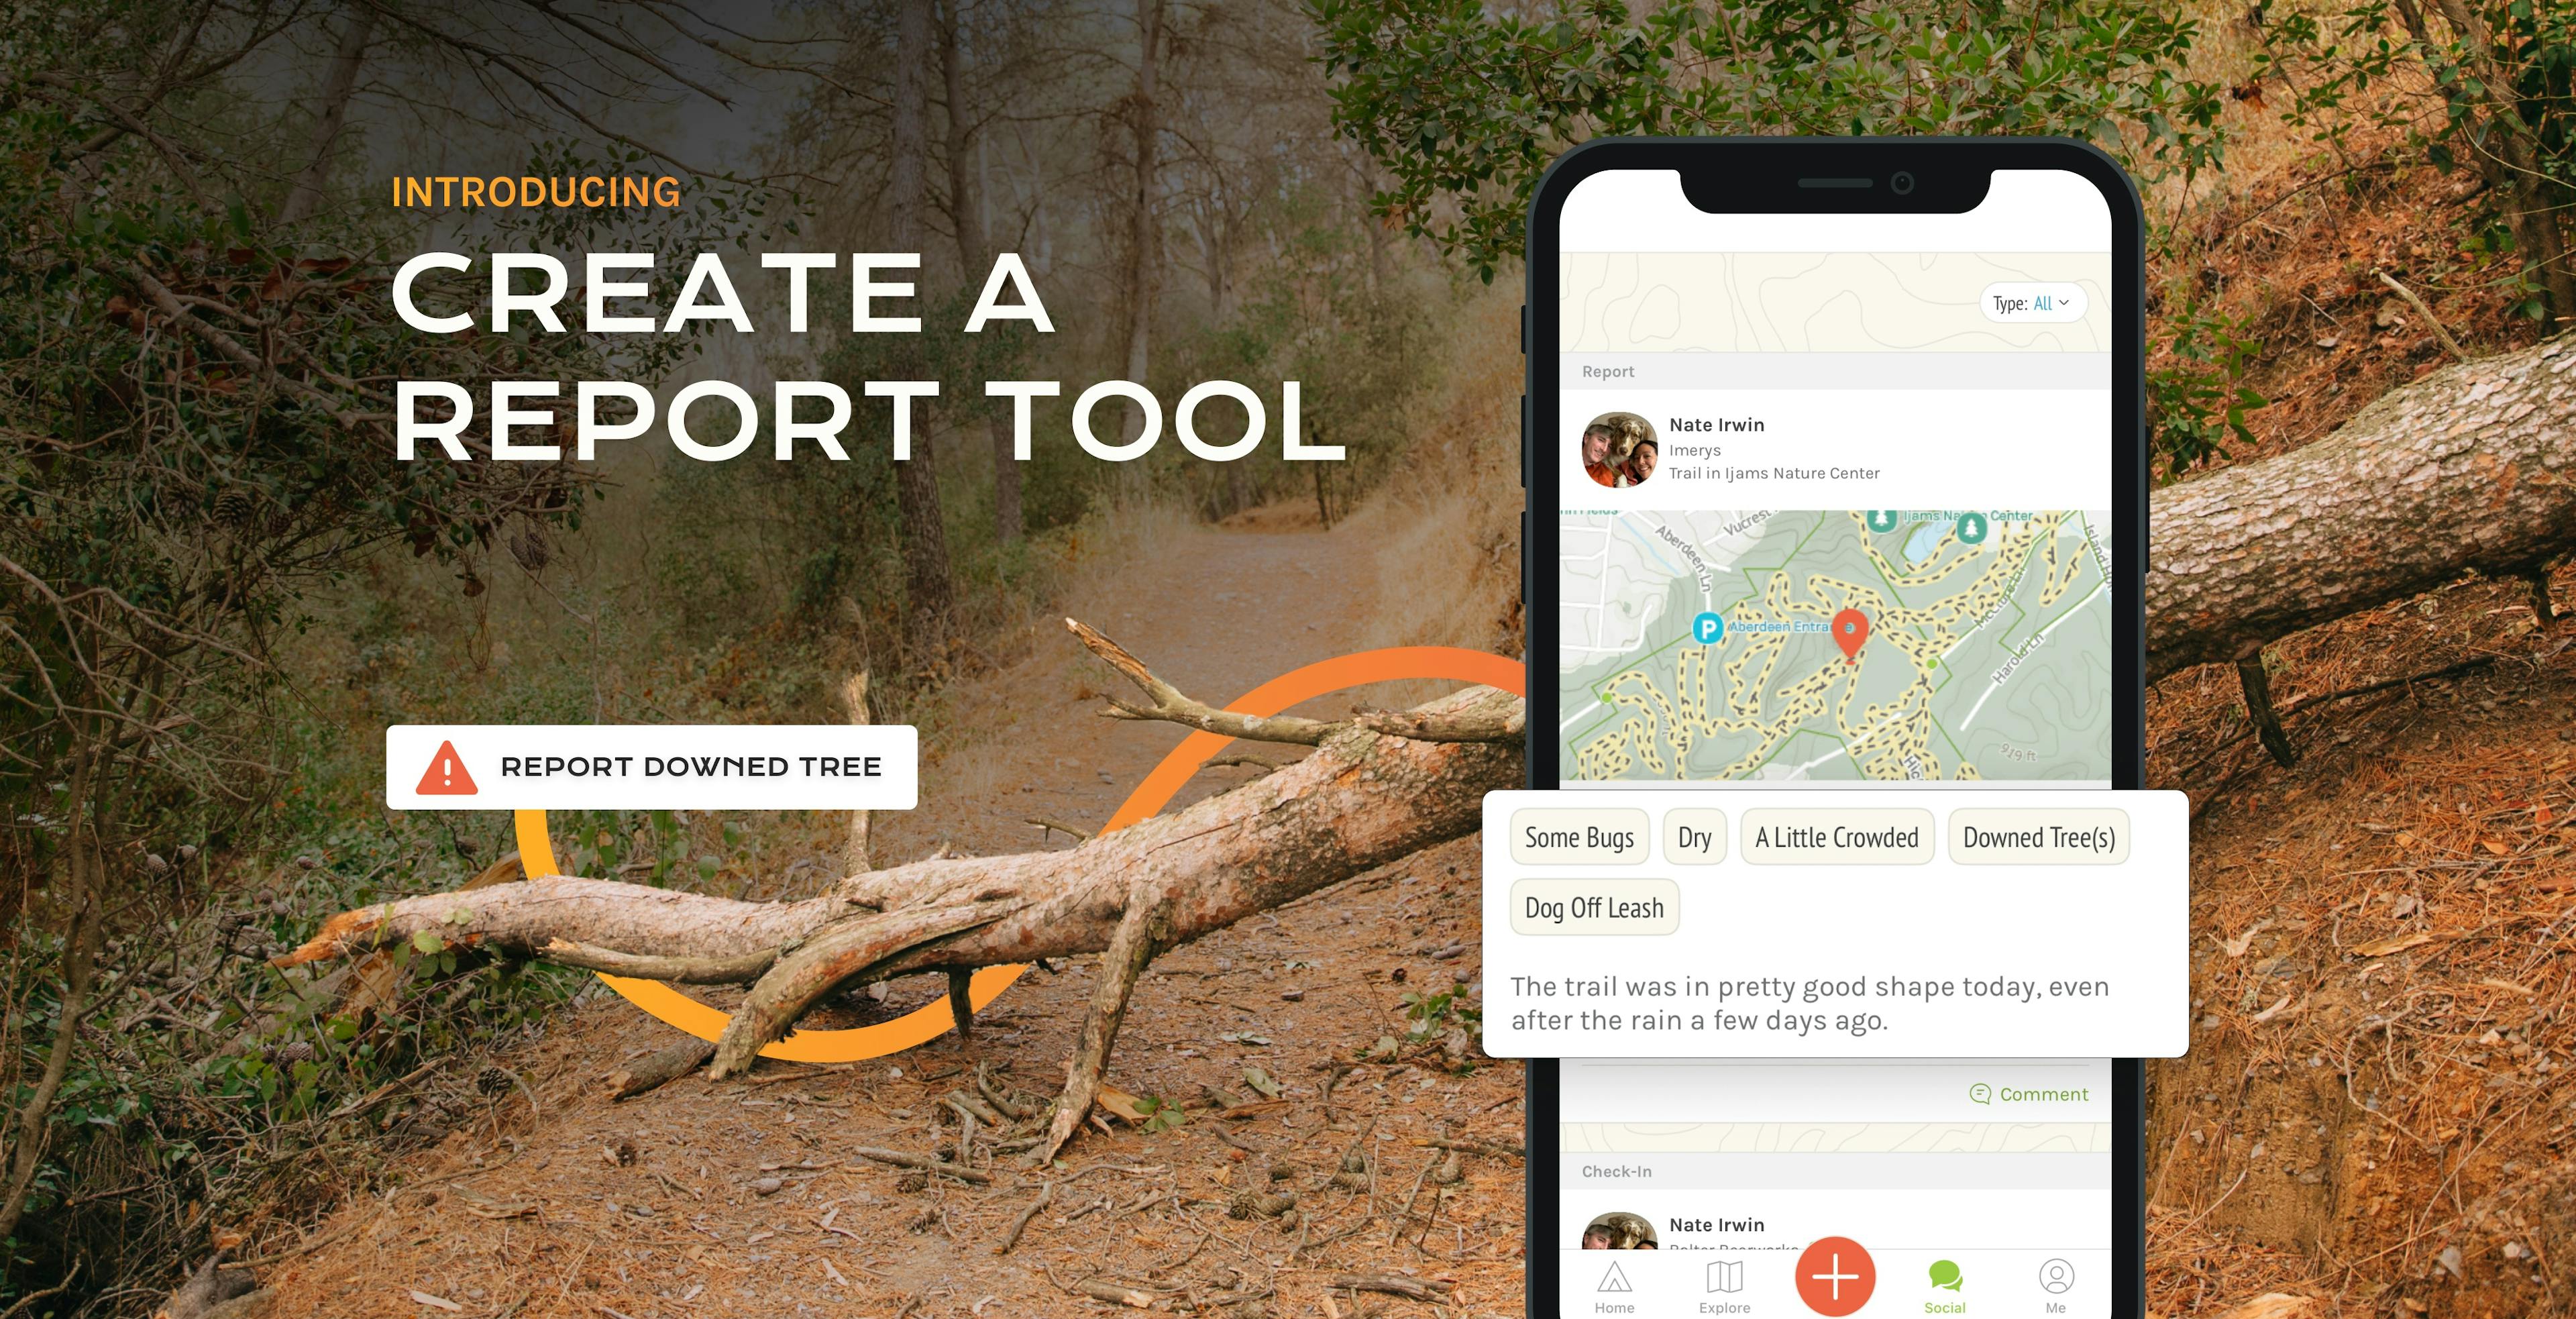 Introducing the Create a Report Tool